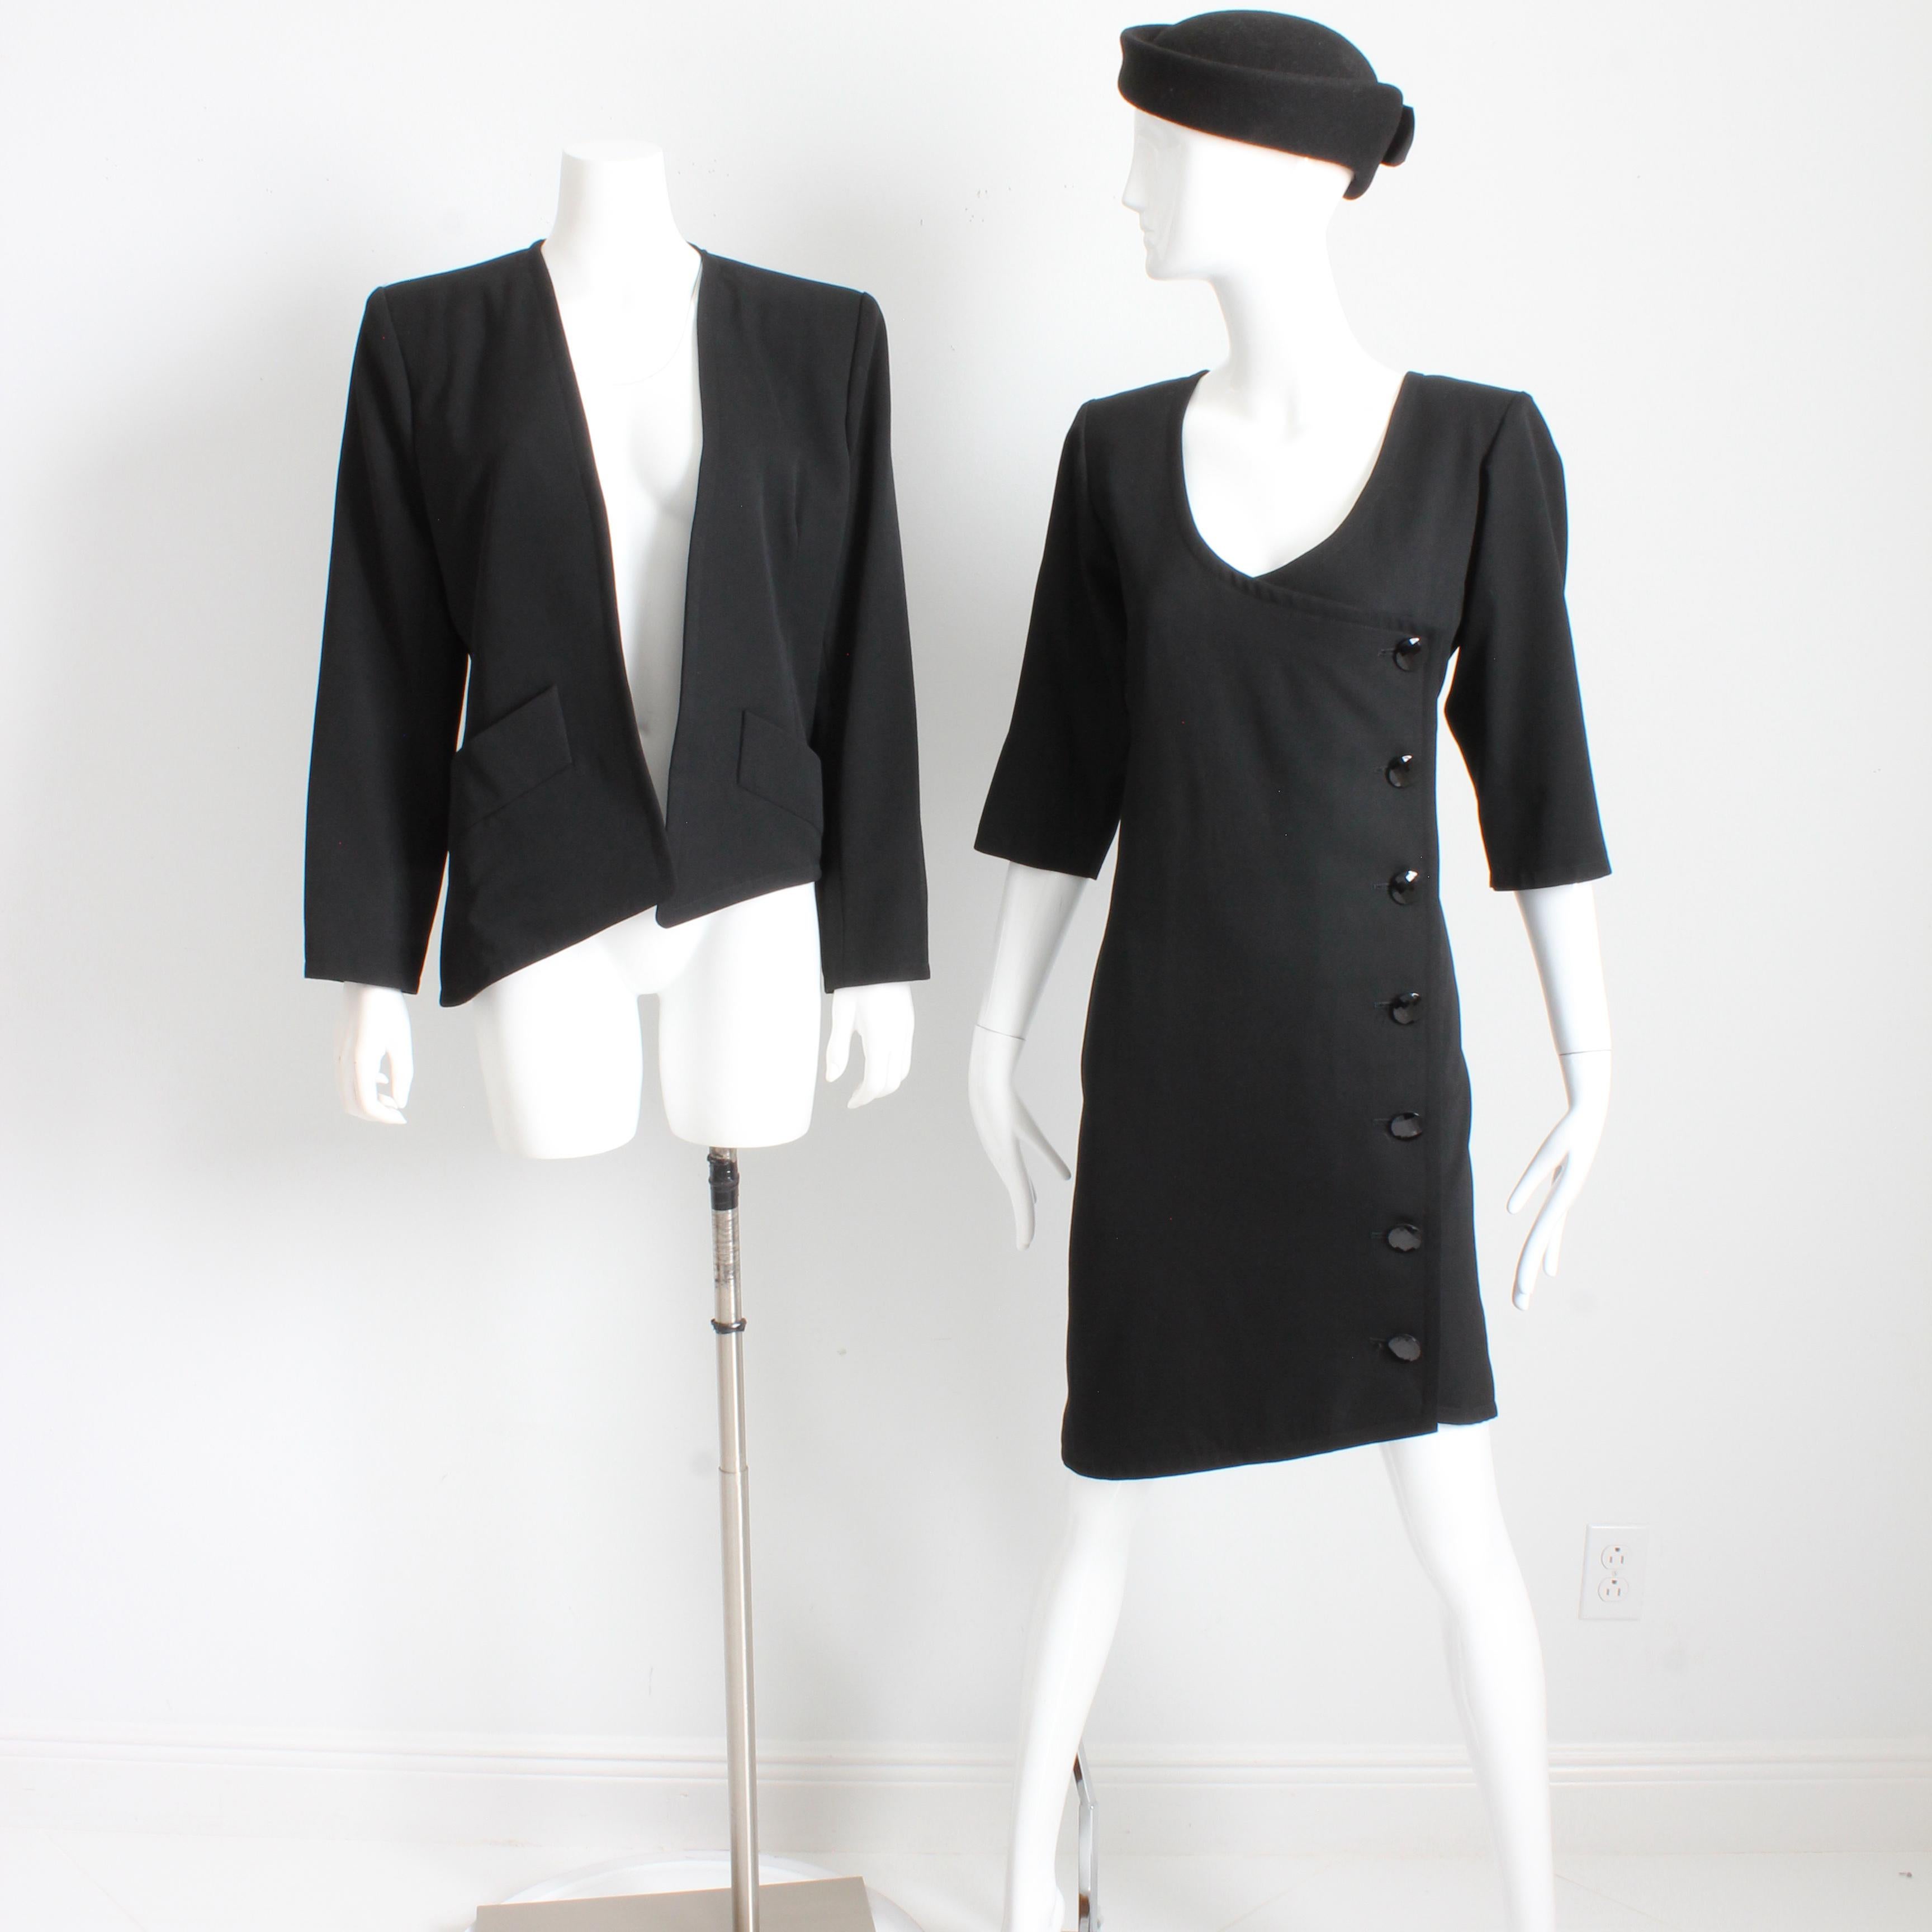 Authentic, preowned, vintage Yves Saint Laurent Rive Gauche dress and jacket, 2 pc set, likely made in the early 1990s. Made from black wool gabardine, both pieces are lined in black satin. The jacket has shoulder pads, pockets at the hips and is